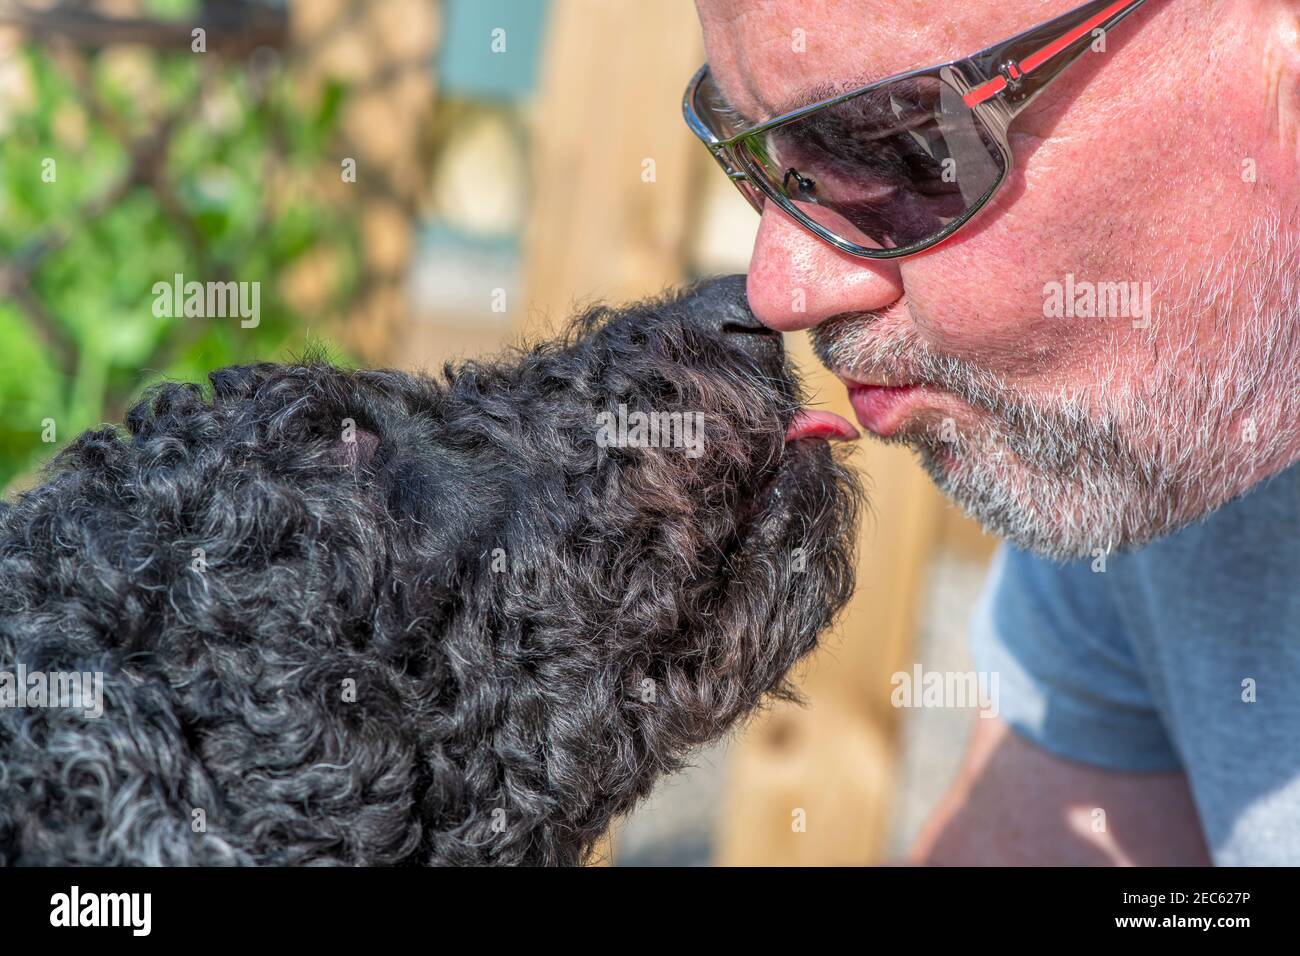 Man in sunglasses being licked on the face by a black Labradoodle dog Stock Photo